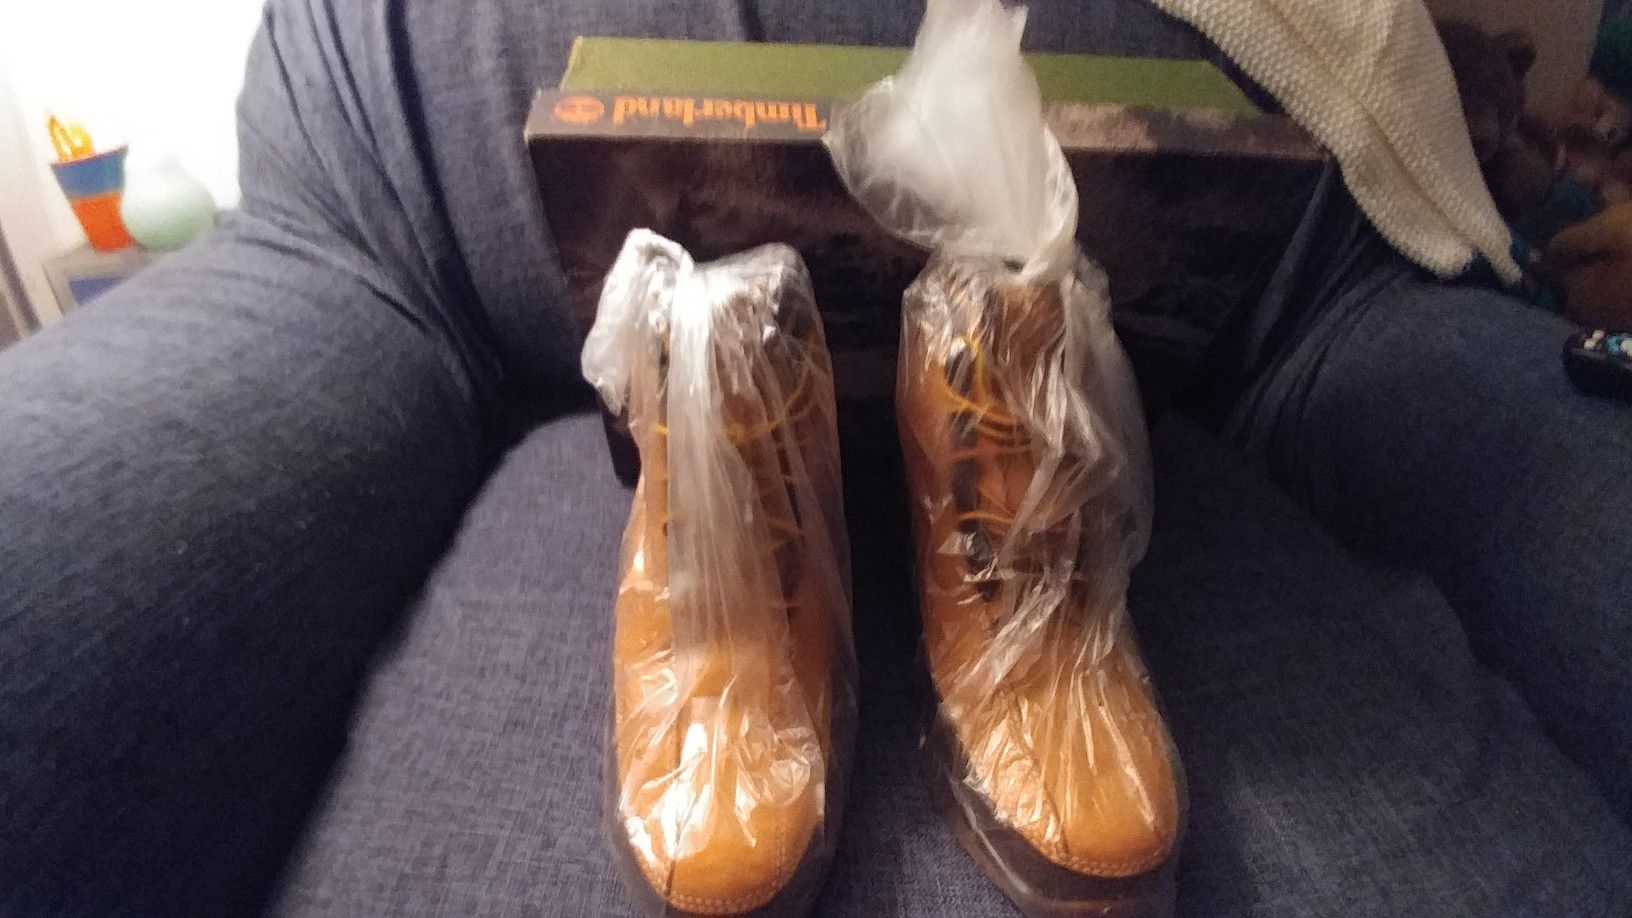 Size 8 & 1/2 Brand New Ladies Timberland boots; CLEAN and Never Worn in original plastic and box. 70.00 OBO